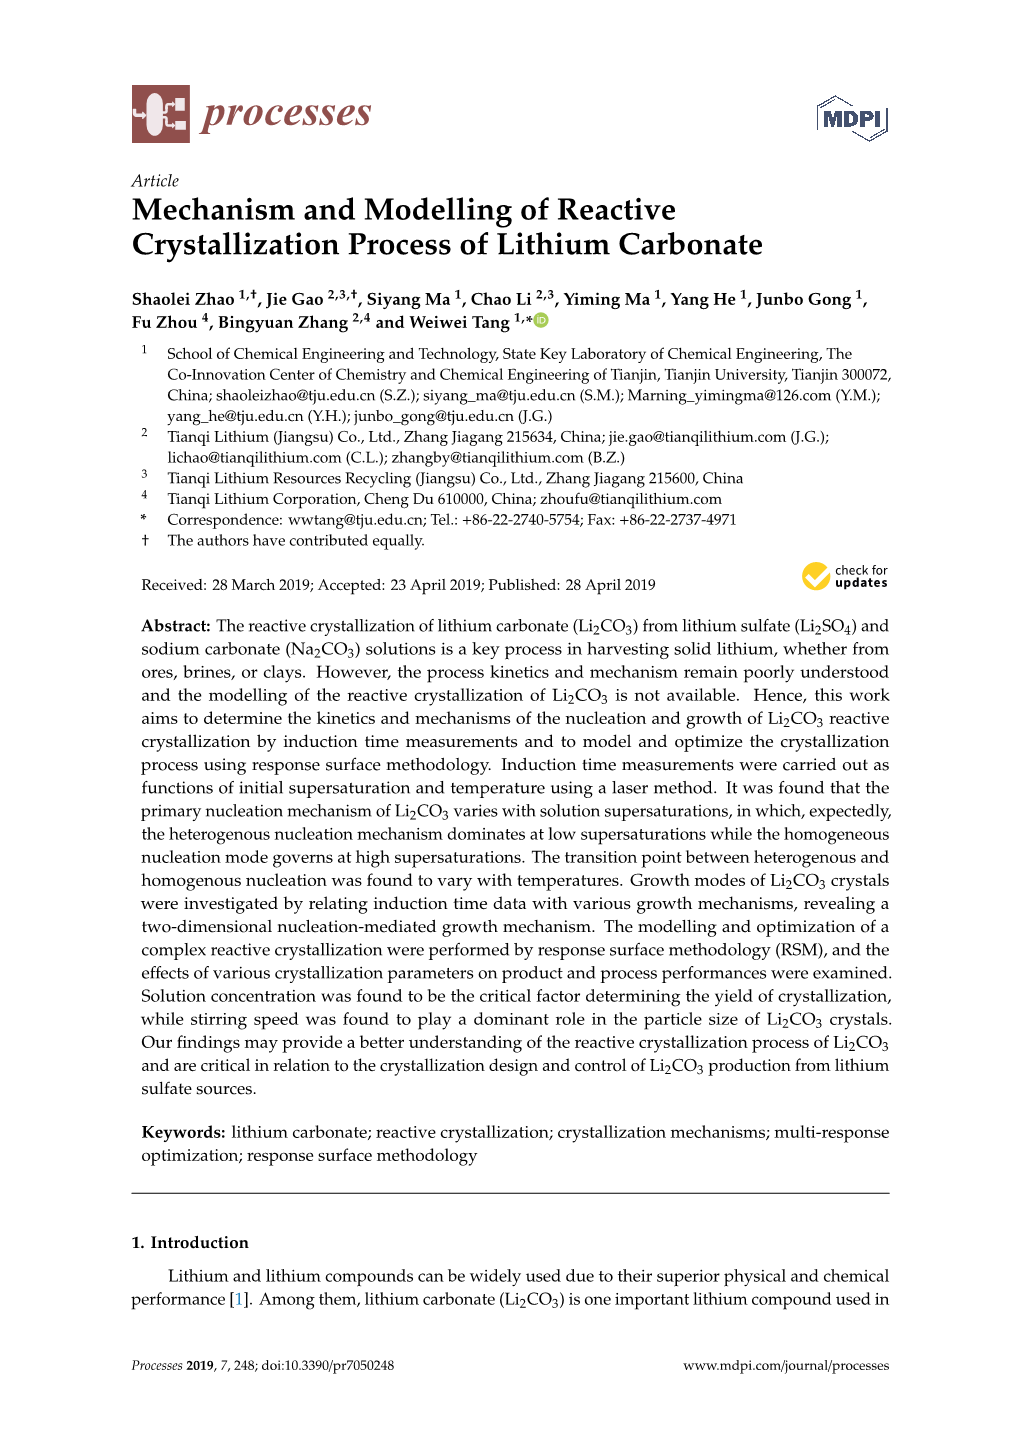 Mechanism and Modelling of Reactive Crystallization Process of Lithium Carbonate